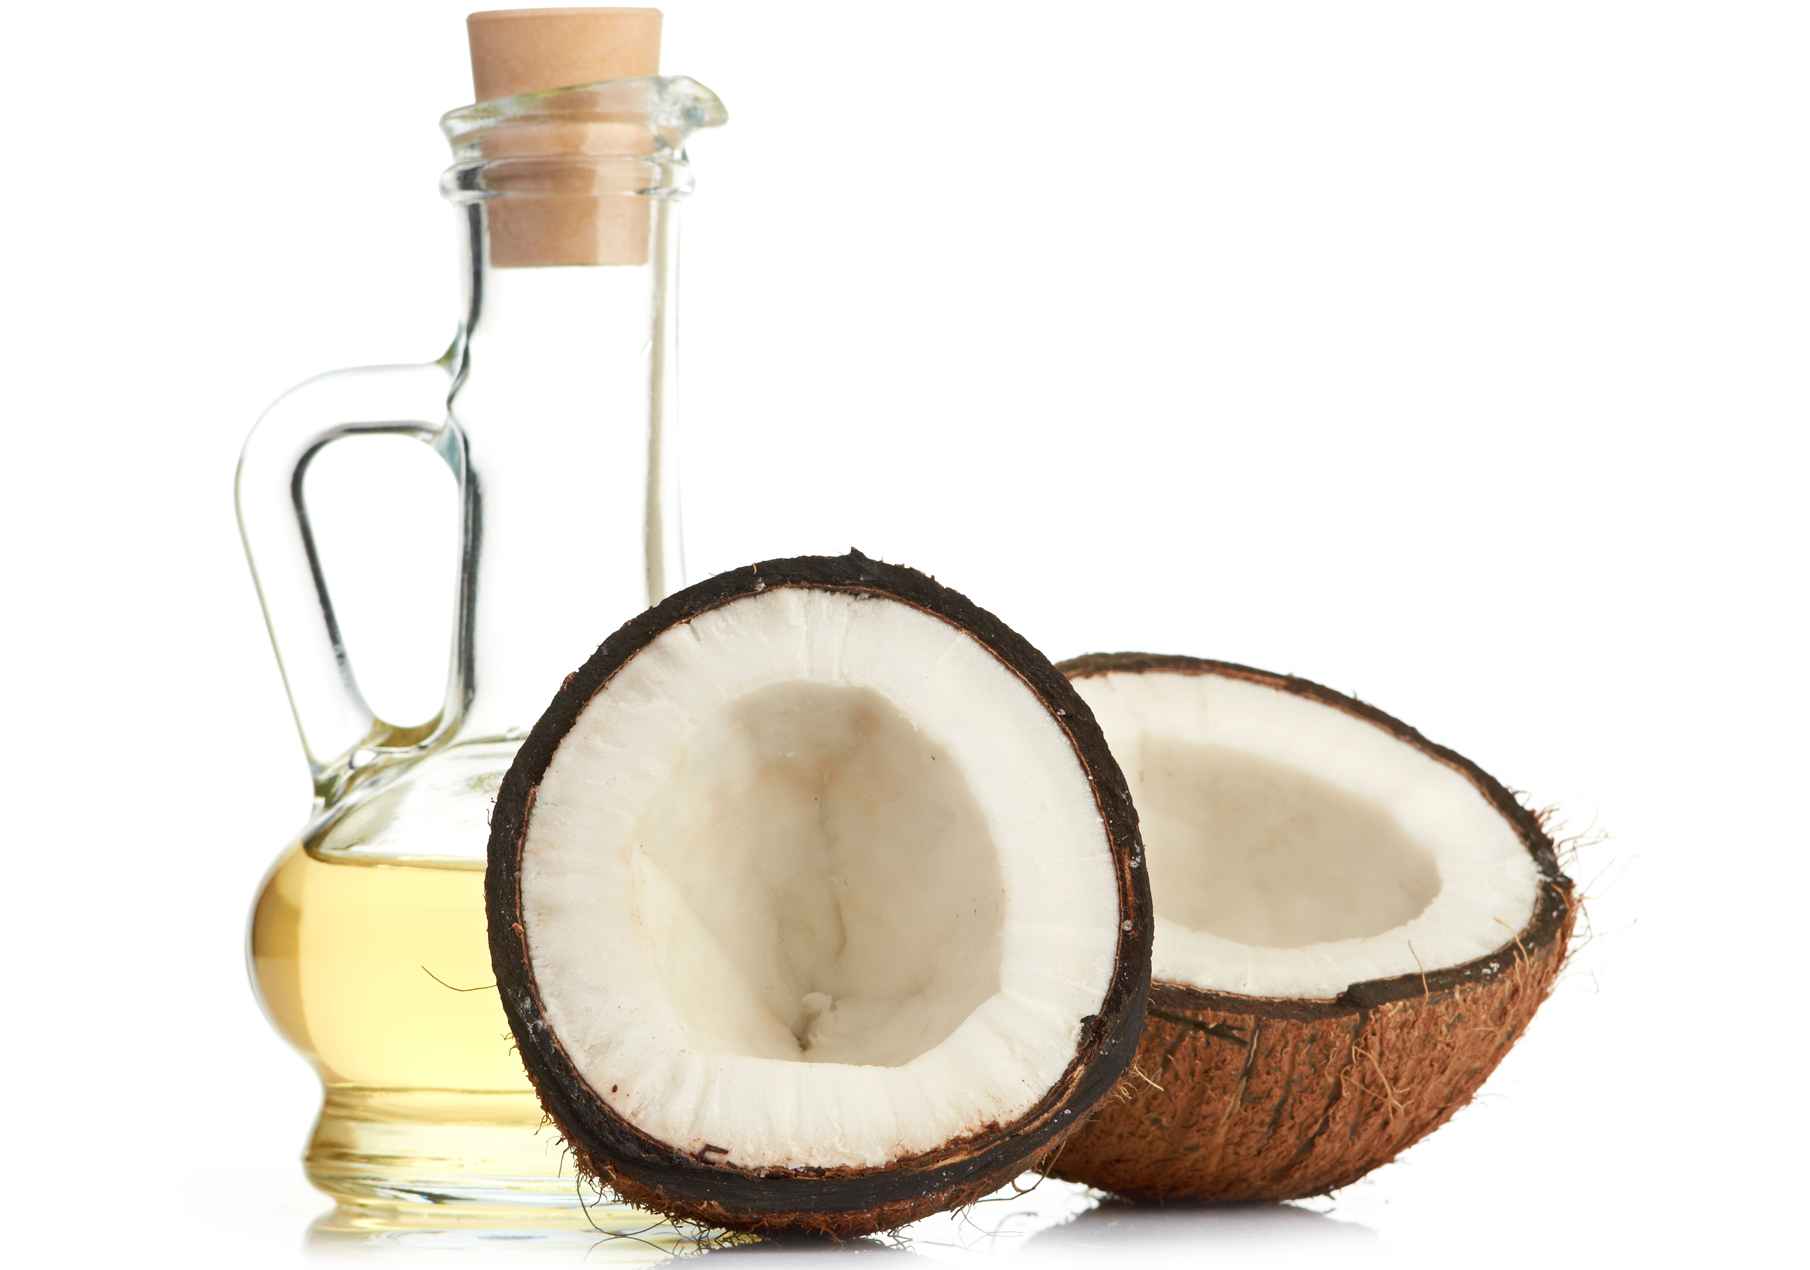 Coconut Oil: The Secret to Natural Beauty